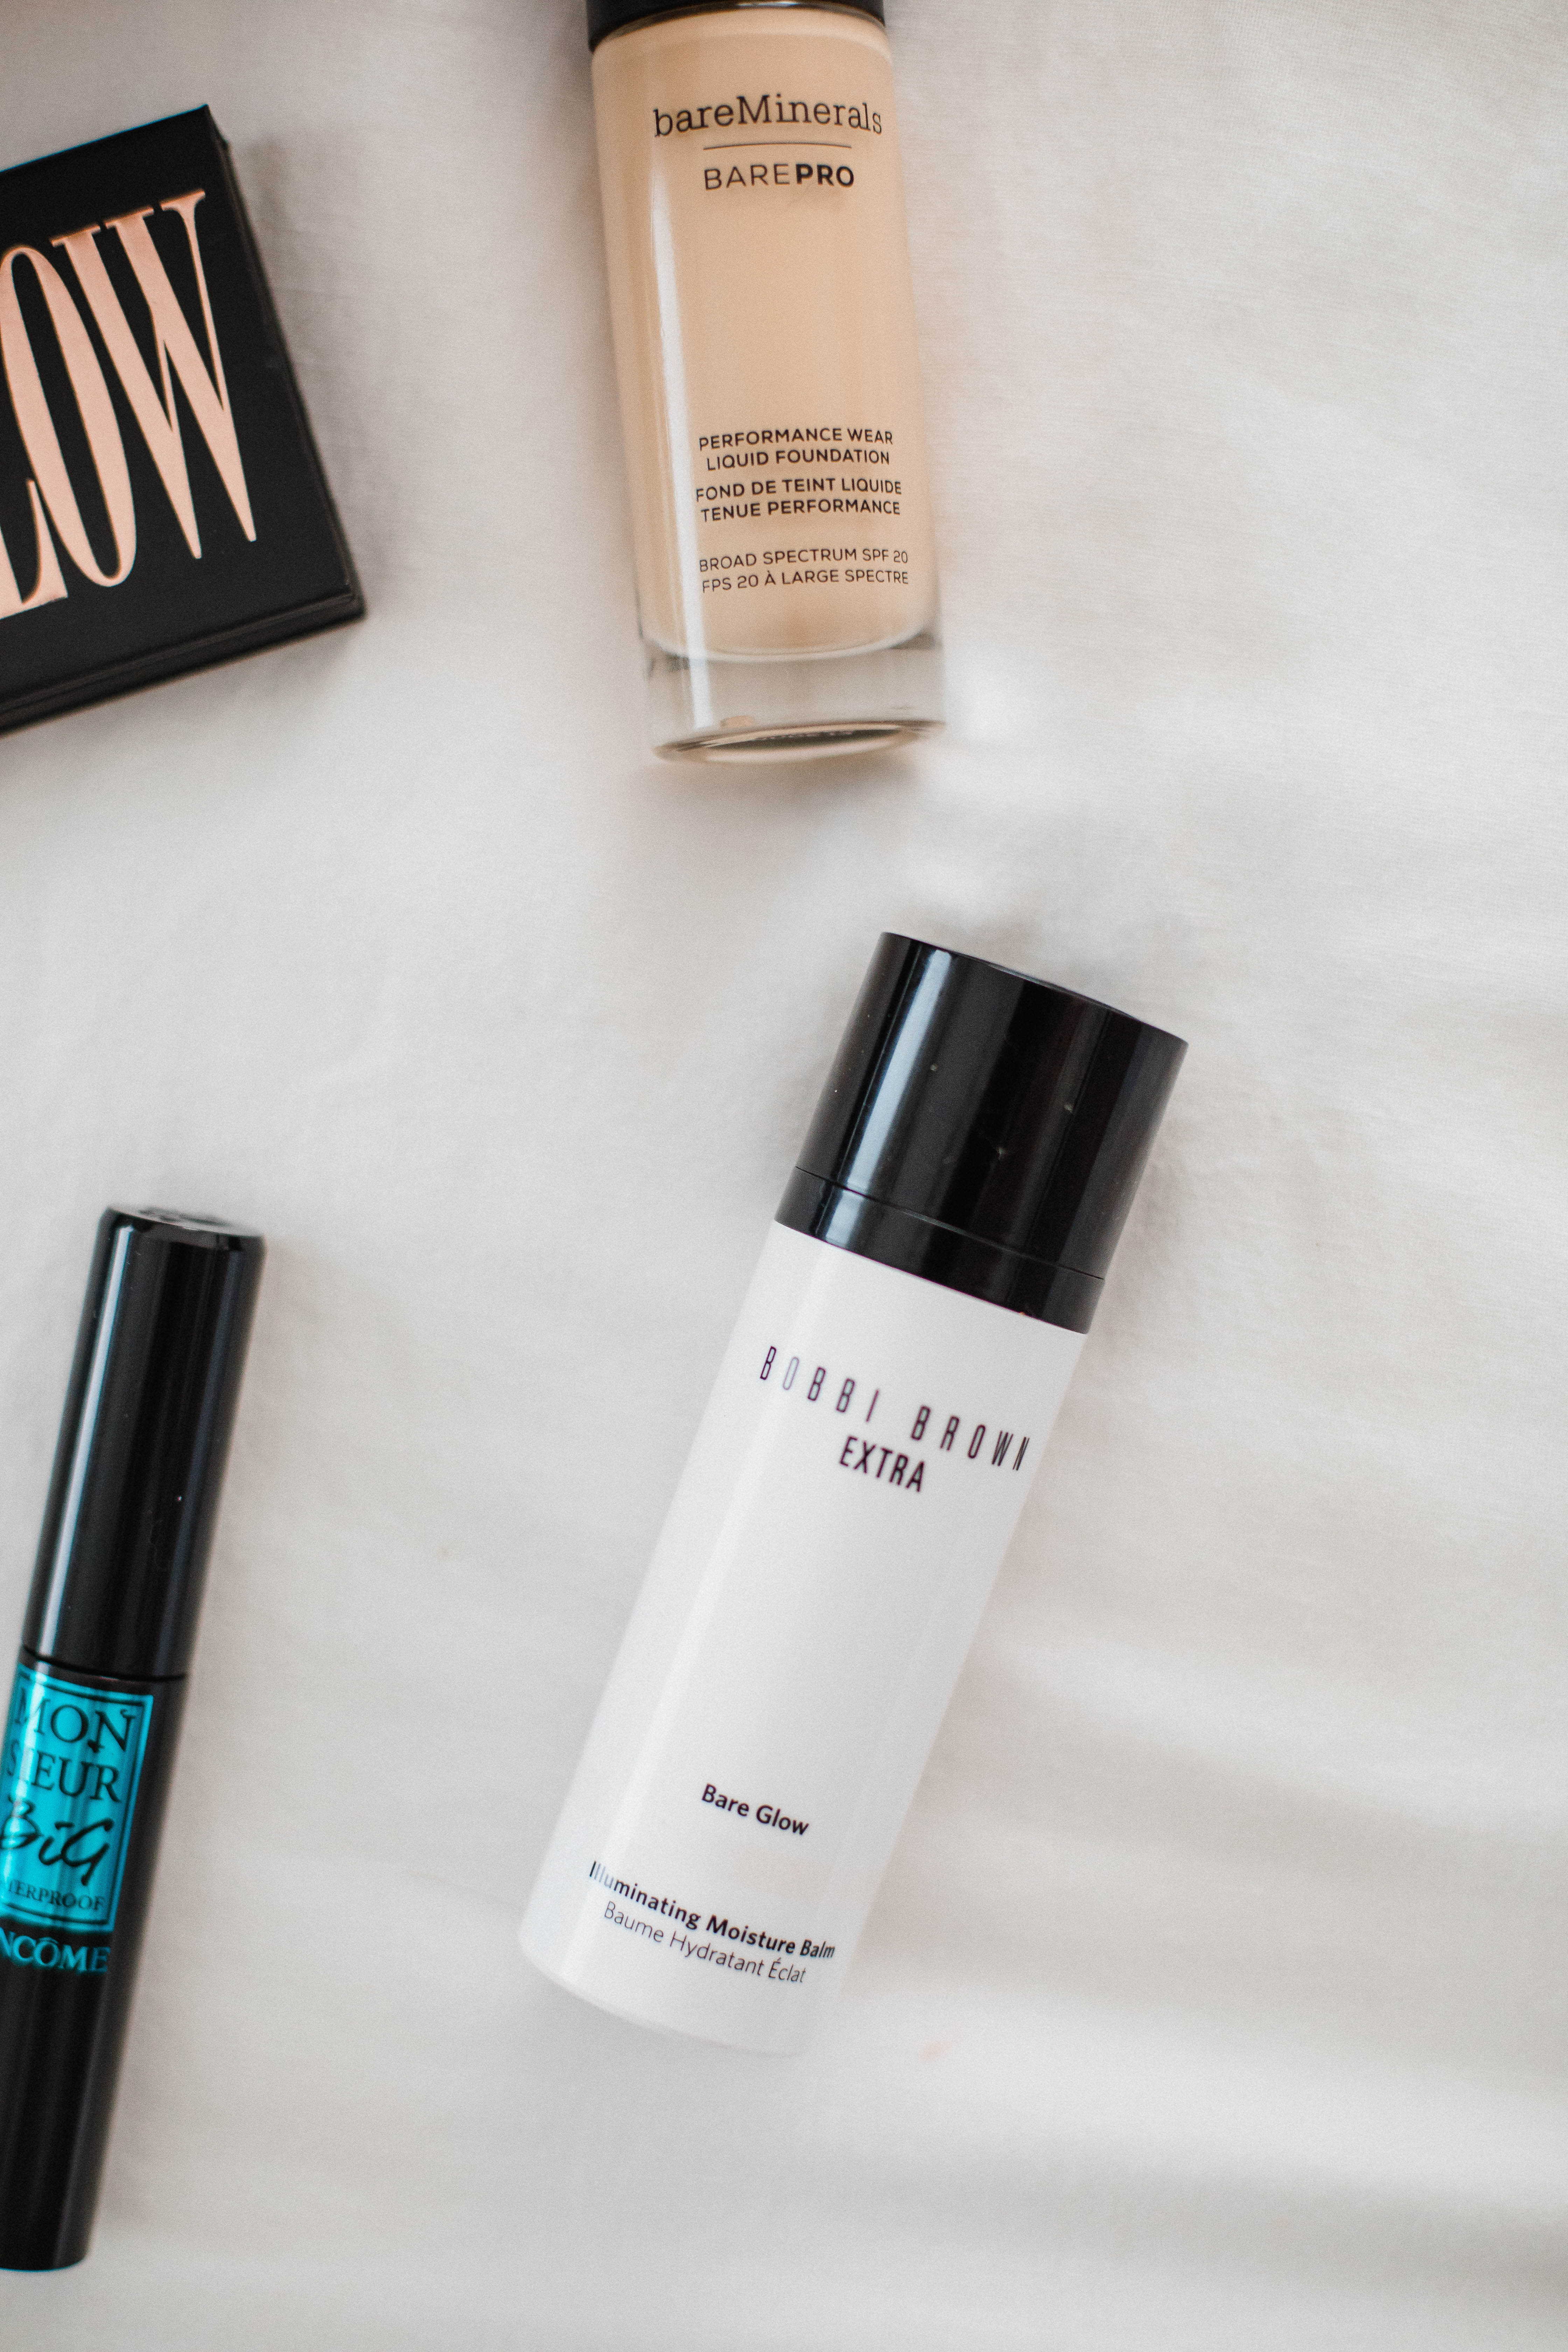 Life and style blogger Lauren McBride shares her spring beauty favorites that will keep your makeup in place and give your skin a glow all season long.